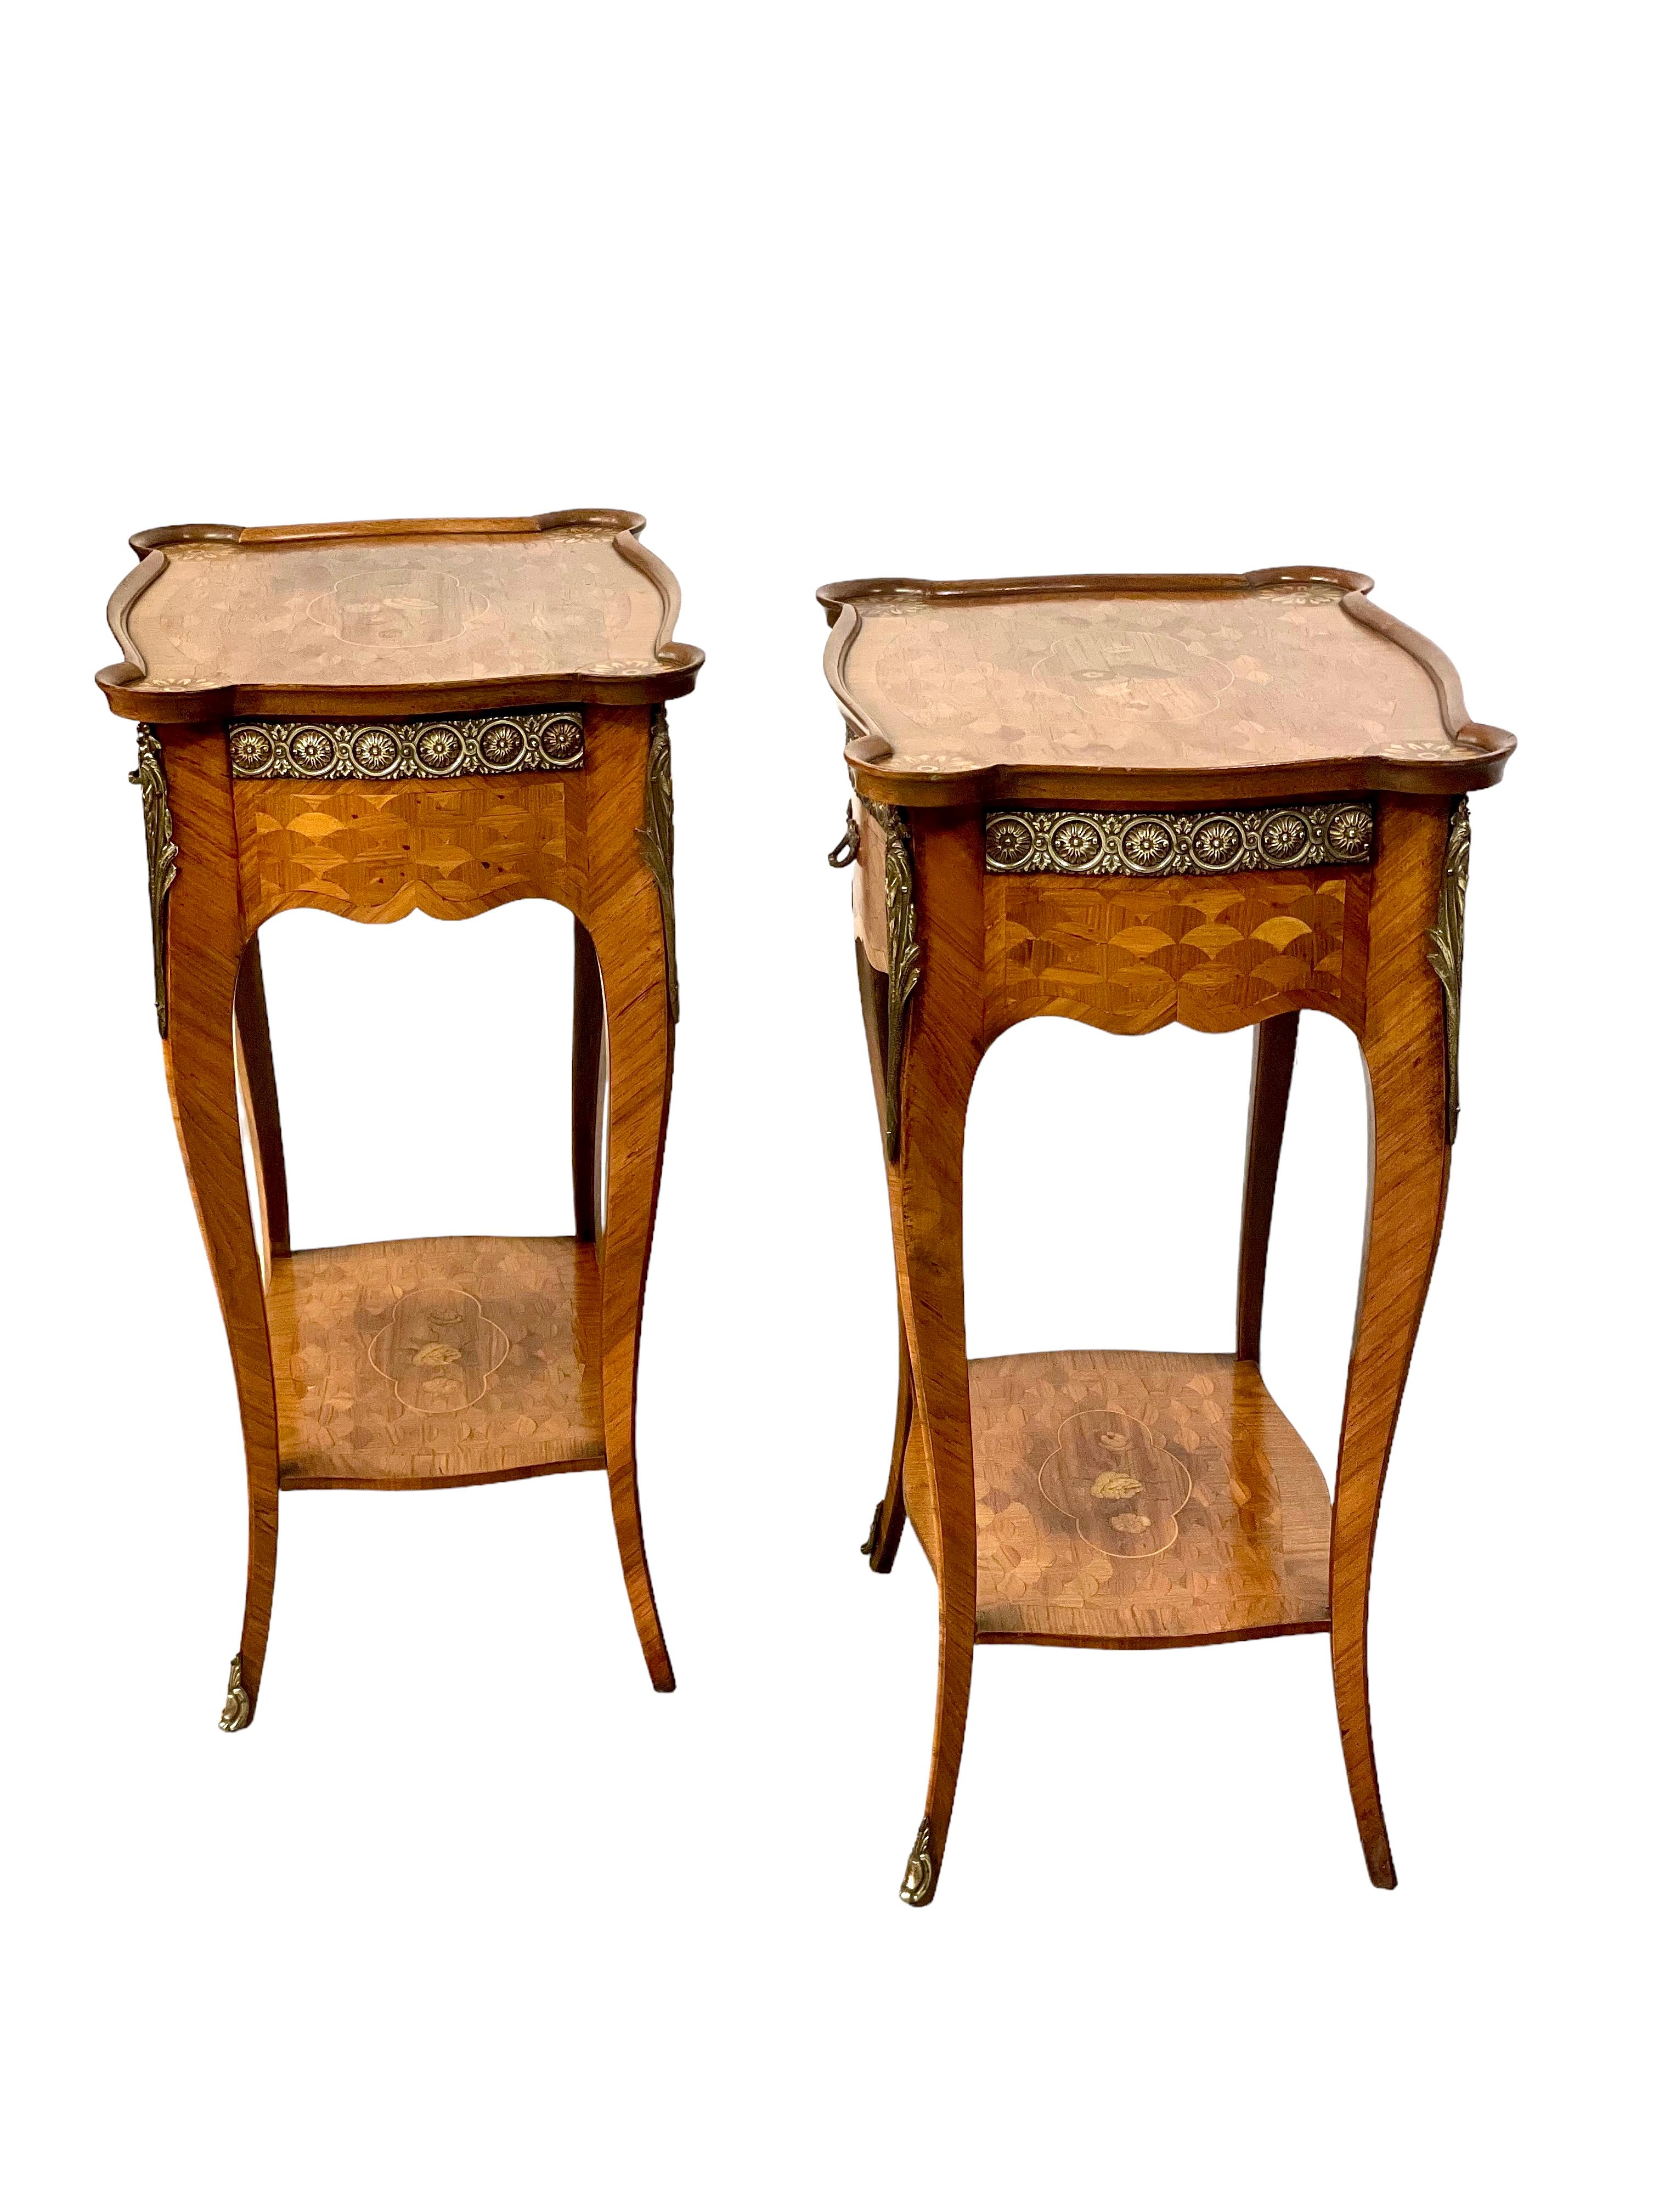 A delightful pair of Louis XV-style side tables in delicate veneered wood, with decorative marquetry inlaid detail on all sides. These tables are a lovely 'bombe' shape, standing on elegantly curved cabriole legs, which support a suspended lower